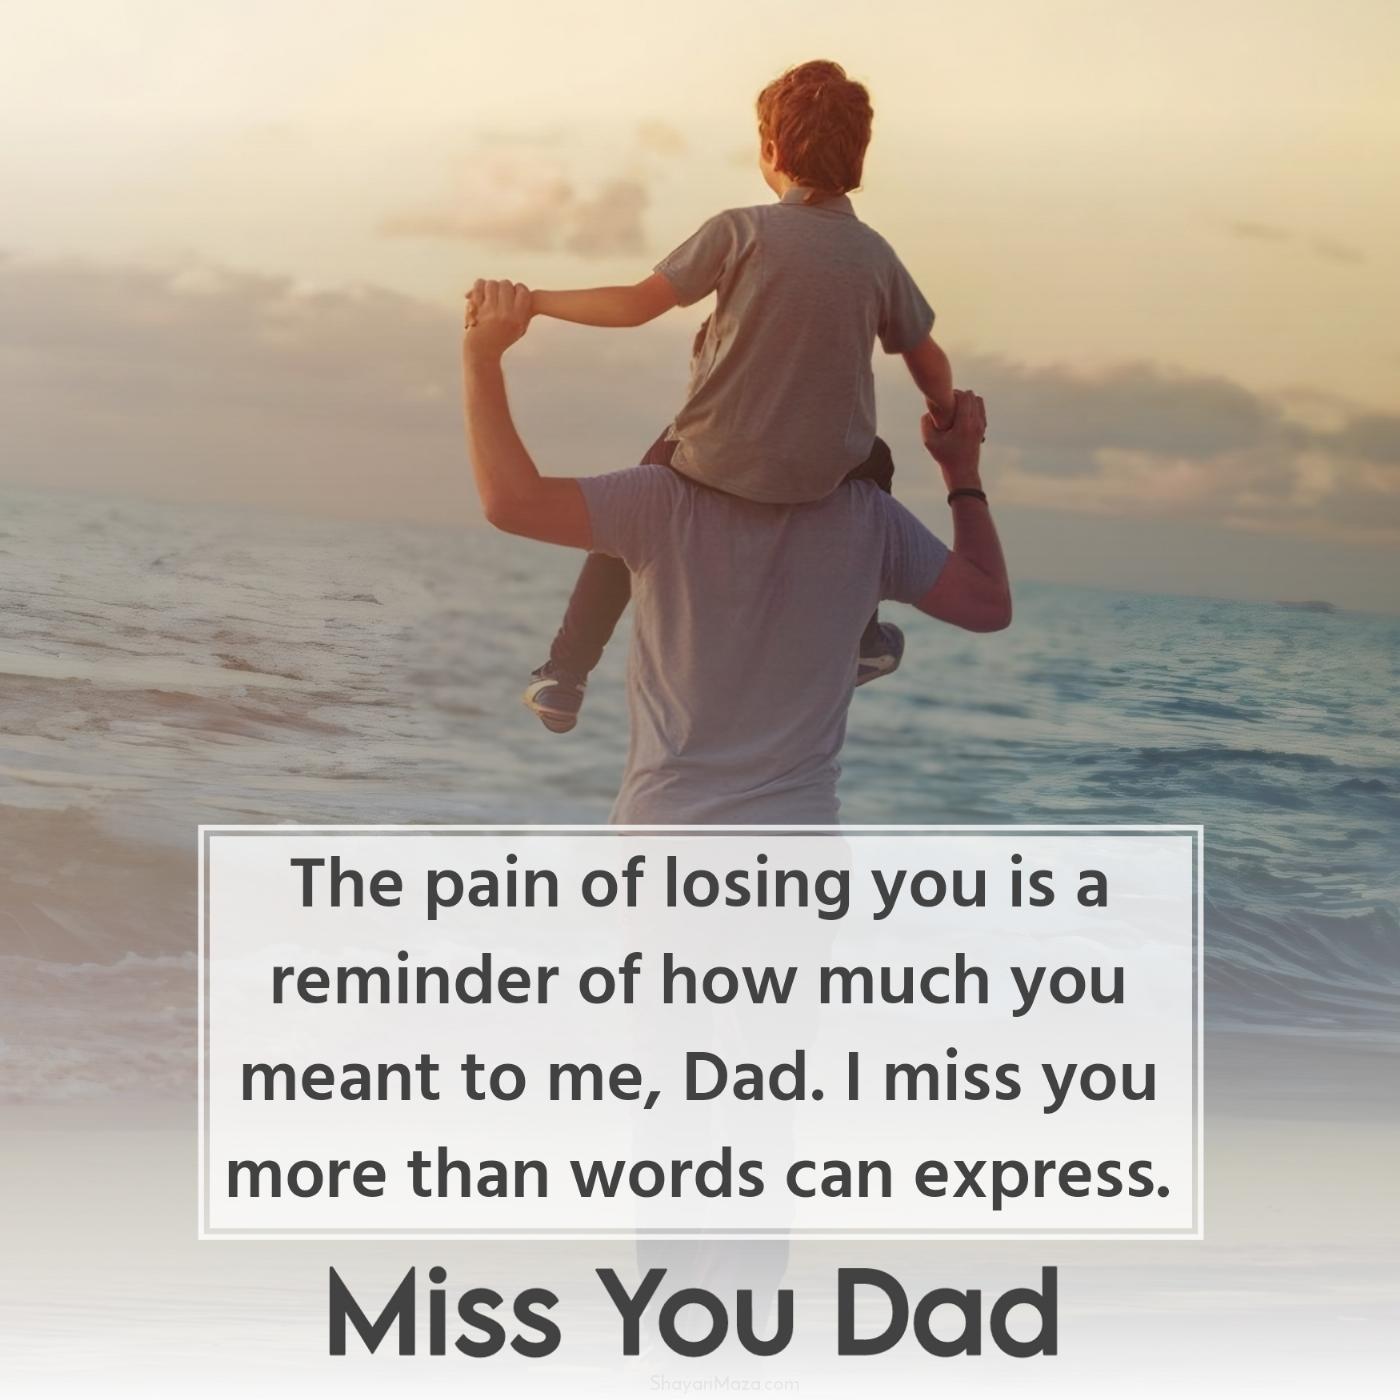 The pain of losing you is a reminder of how much you meant to me Dad